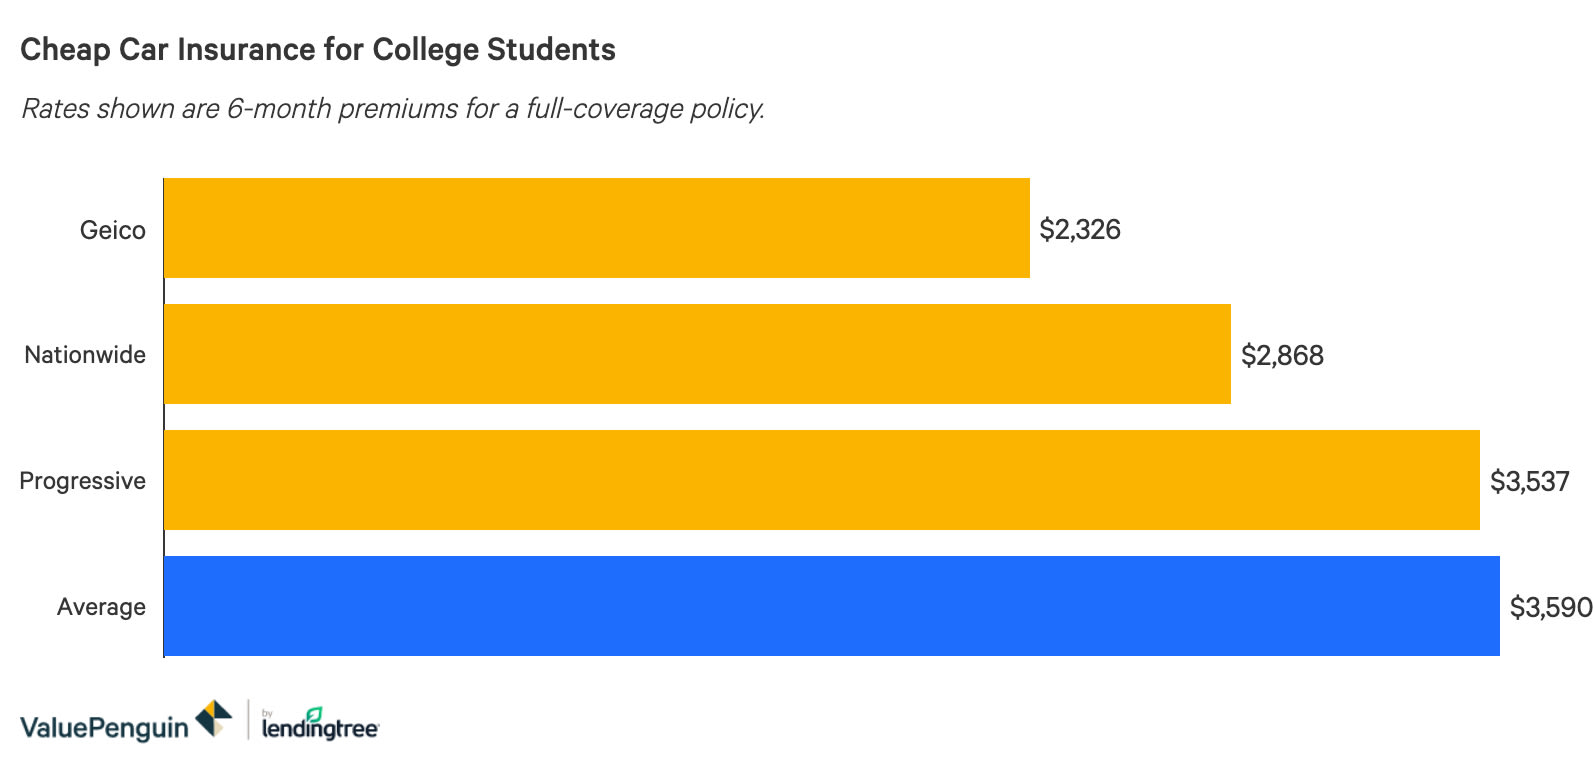 A chart of the top 3 Cheapest Car Insurance Companies for College Students